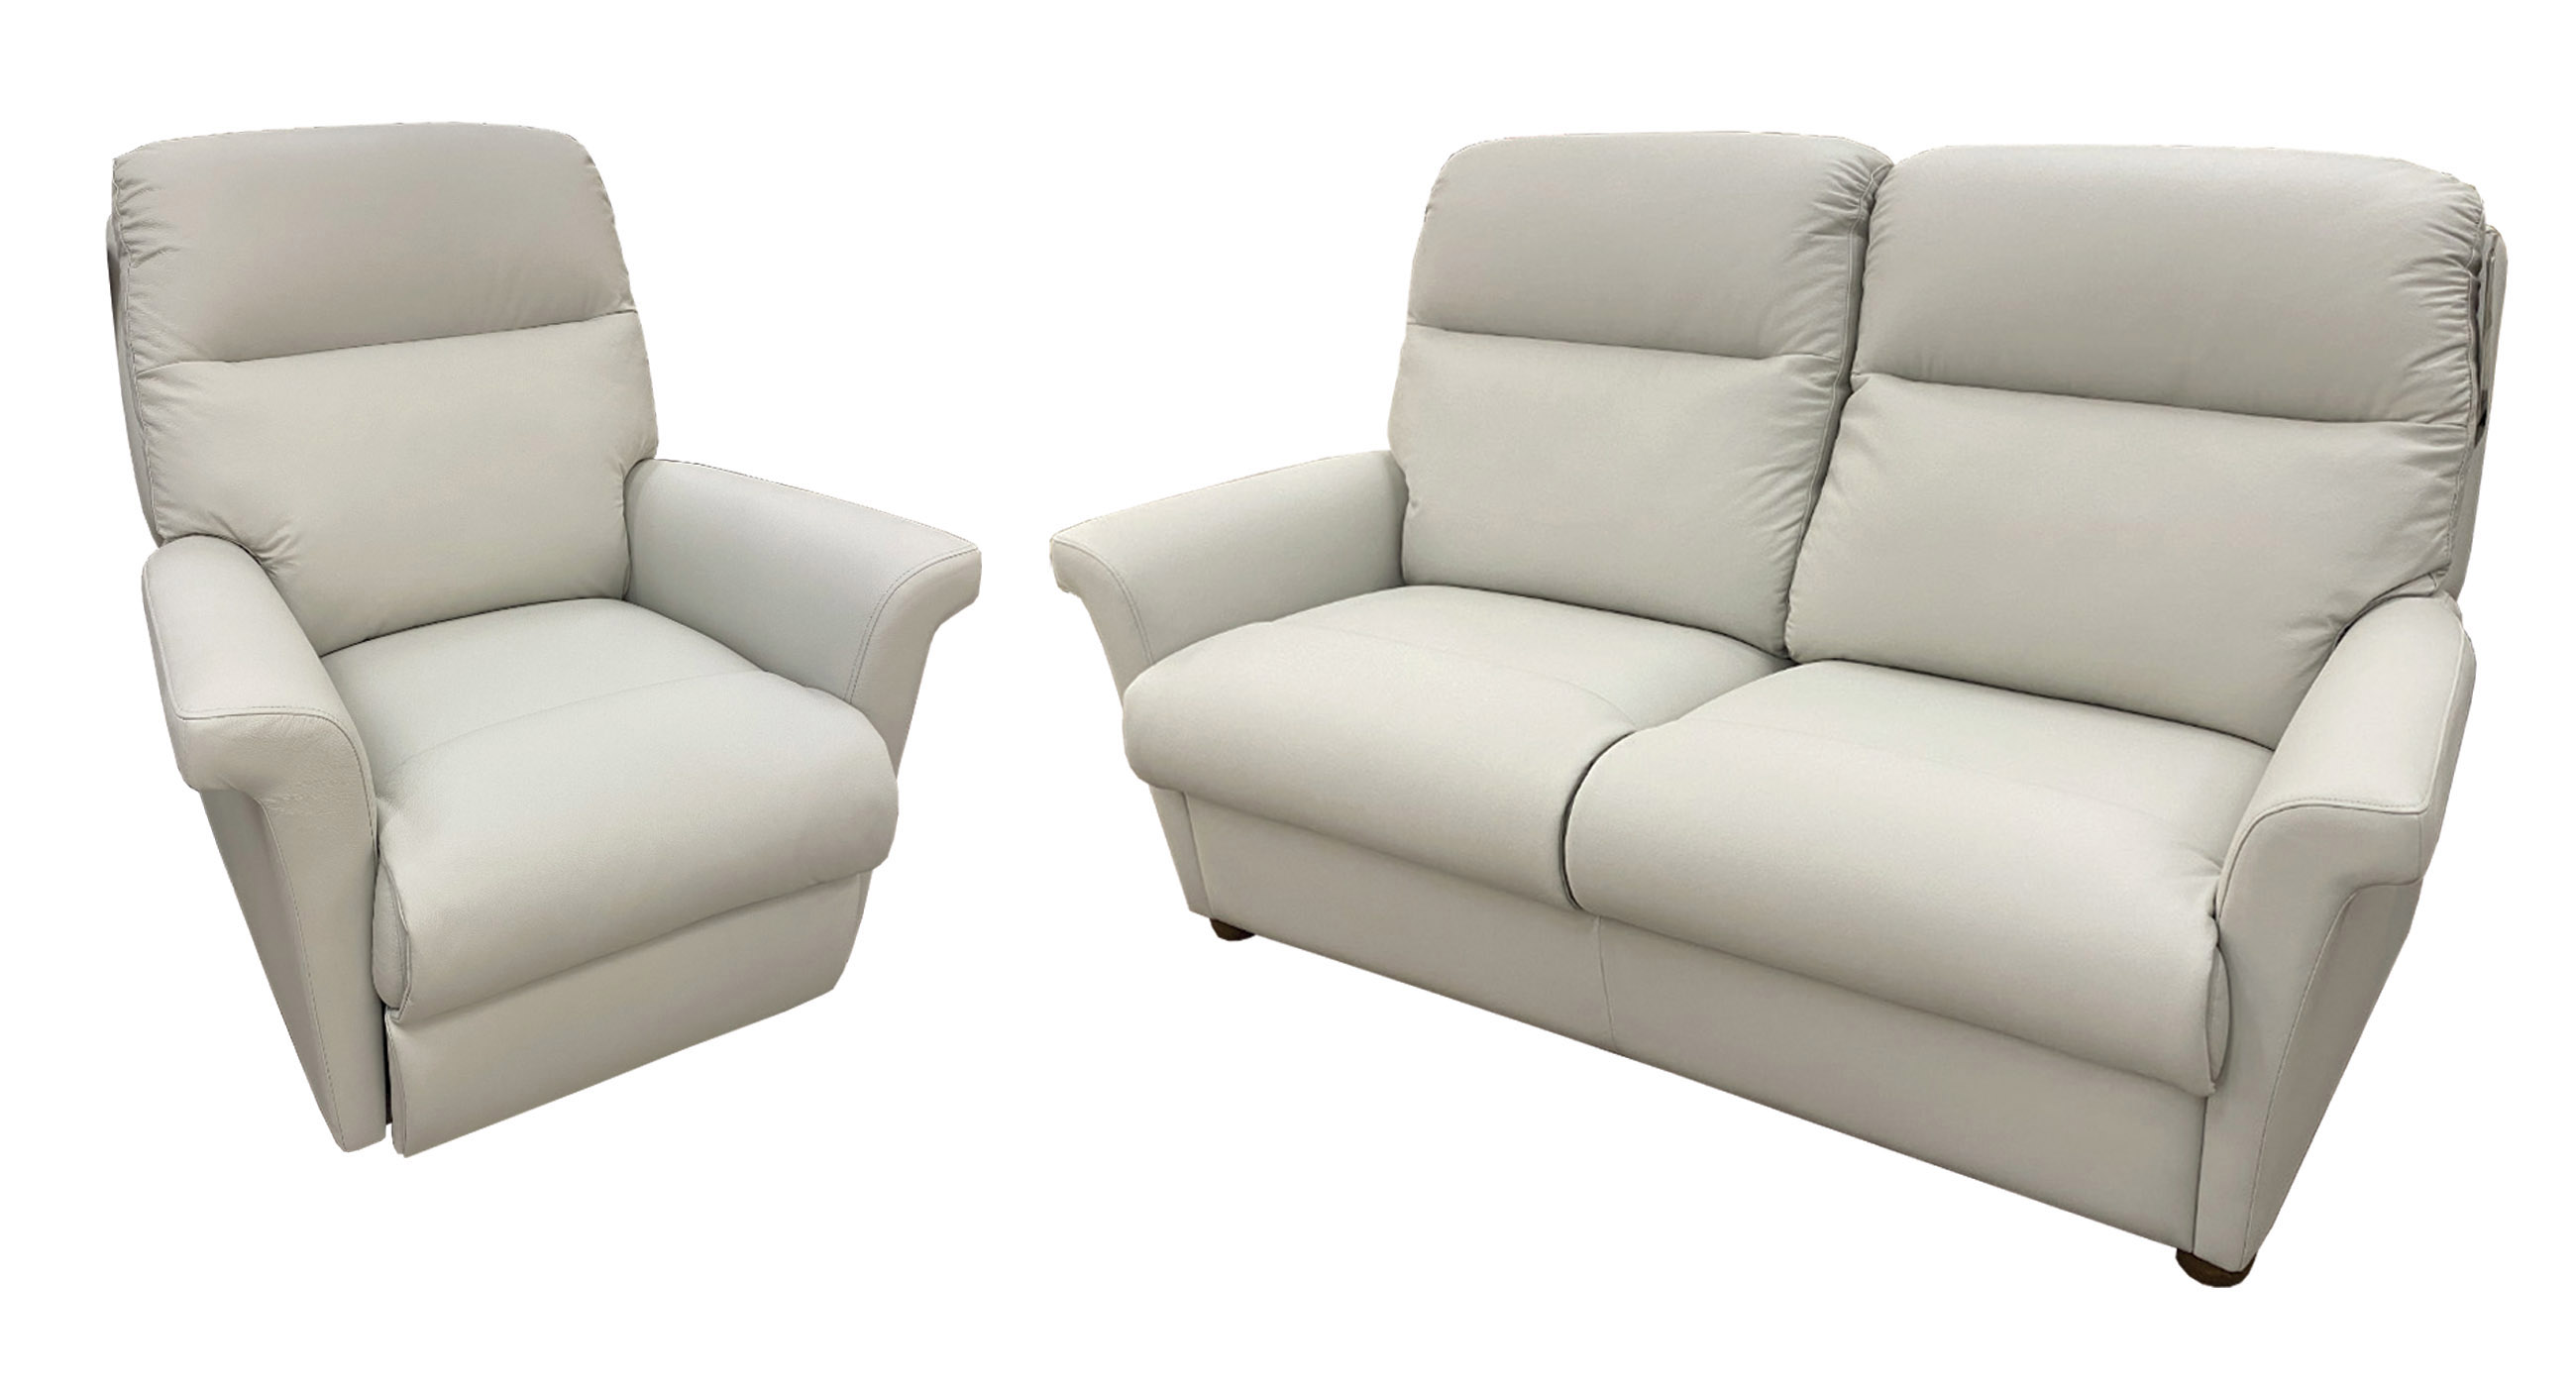 Hadley Reclining Sofa and Chairs